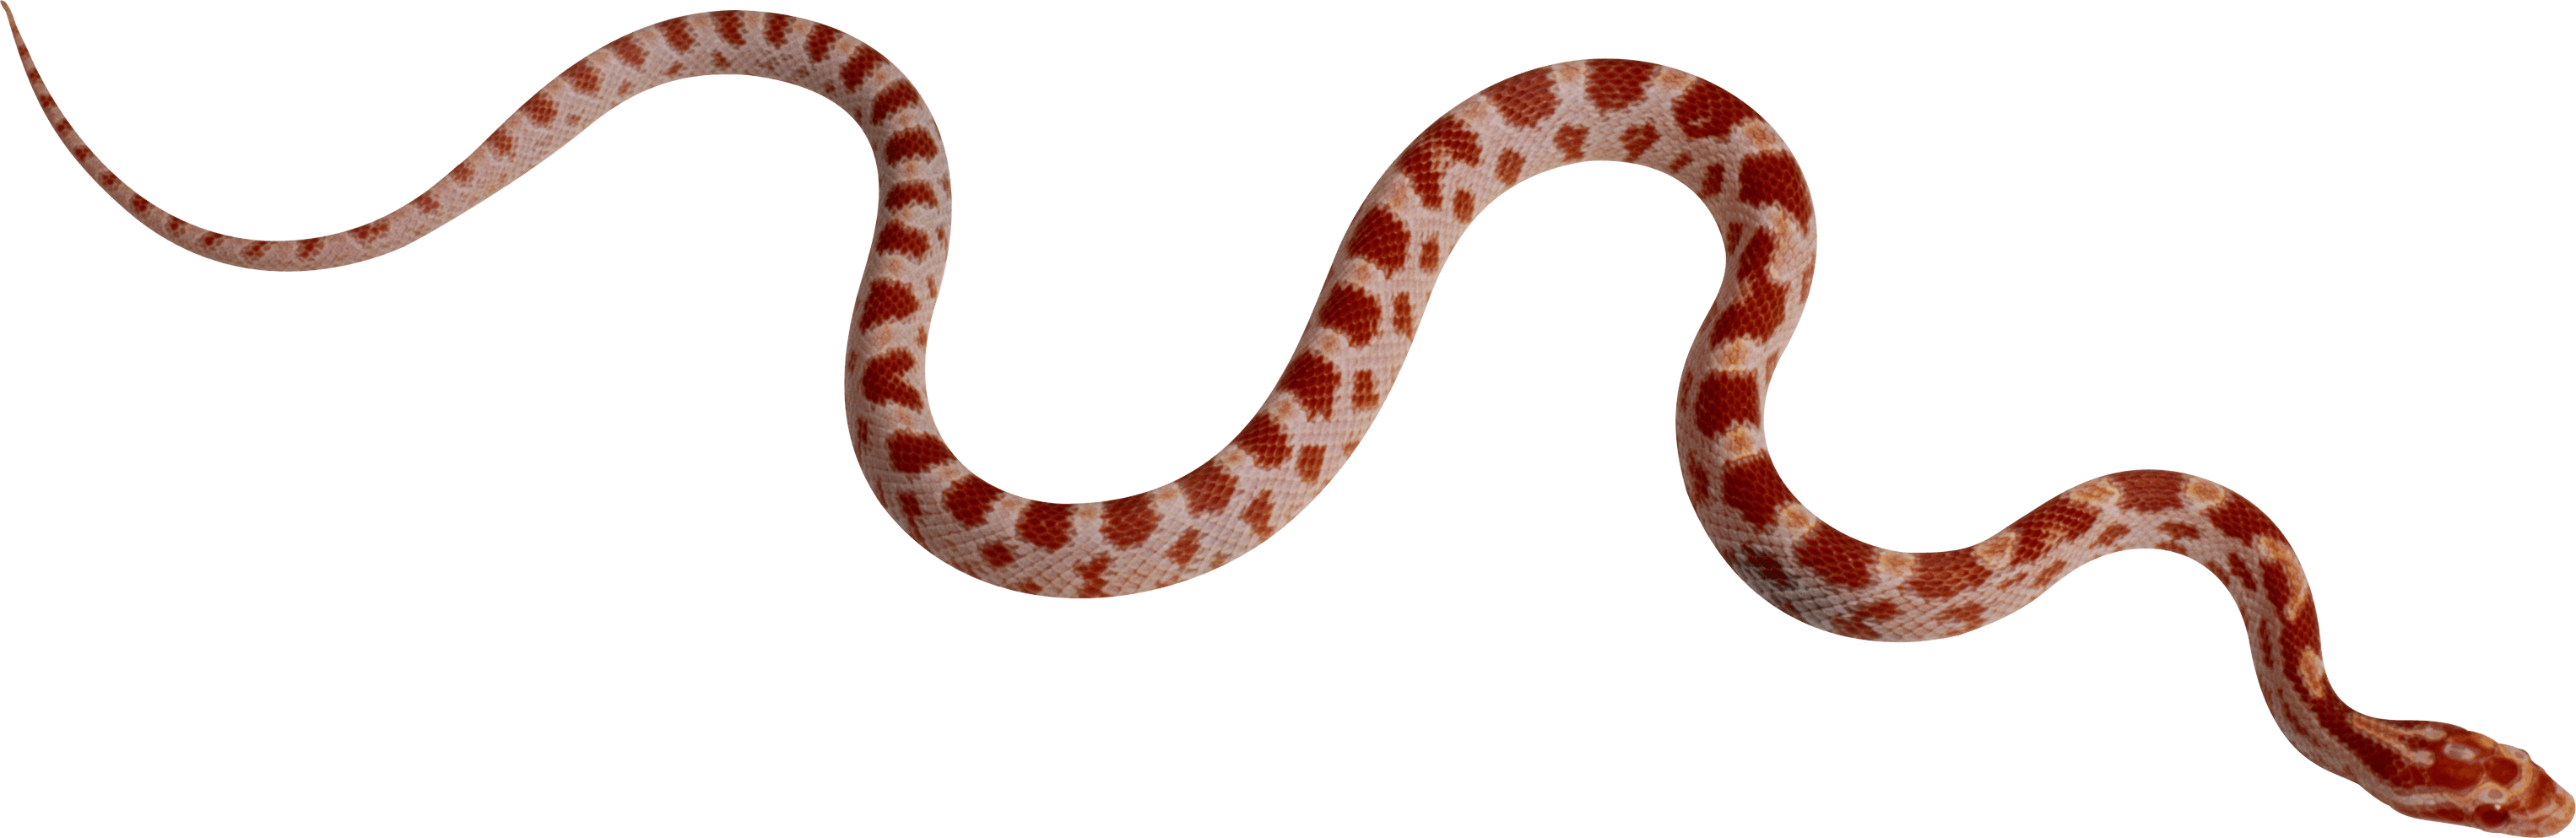 Snake HD PNG - 92993